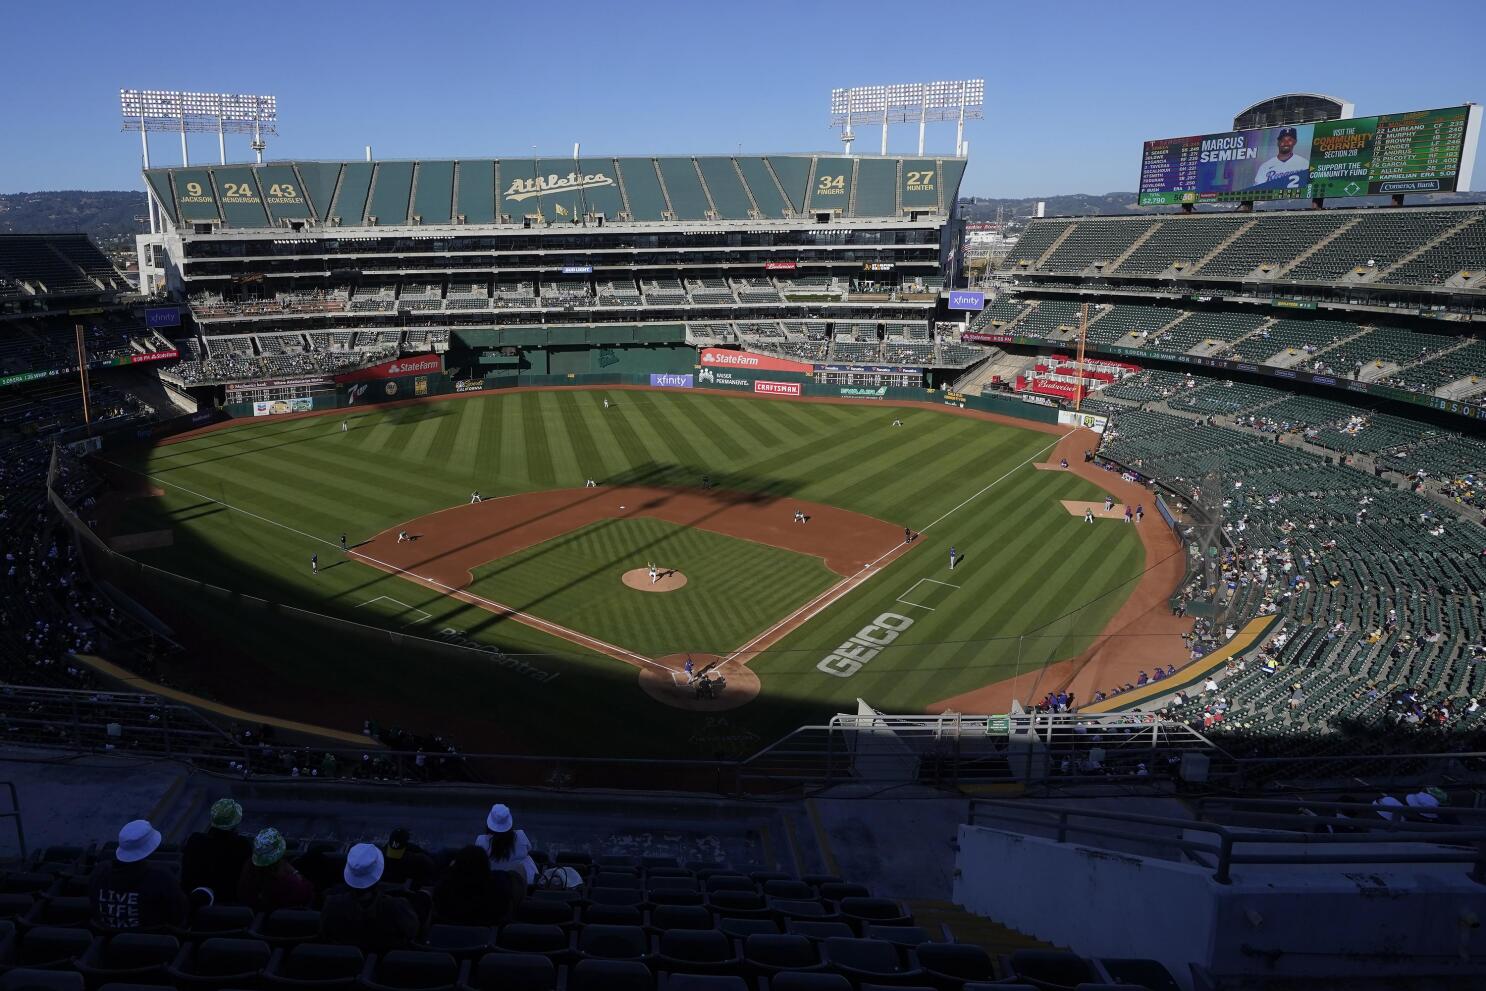 MLB expansion: What cities could get a major league baseball team